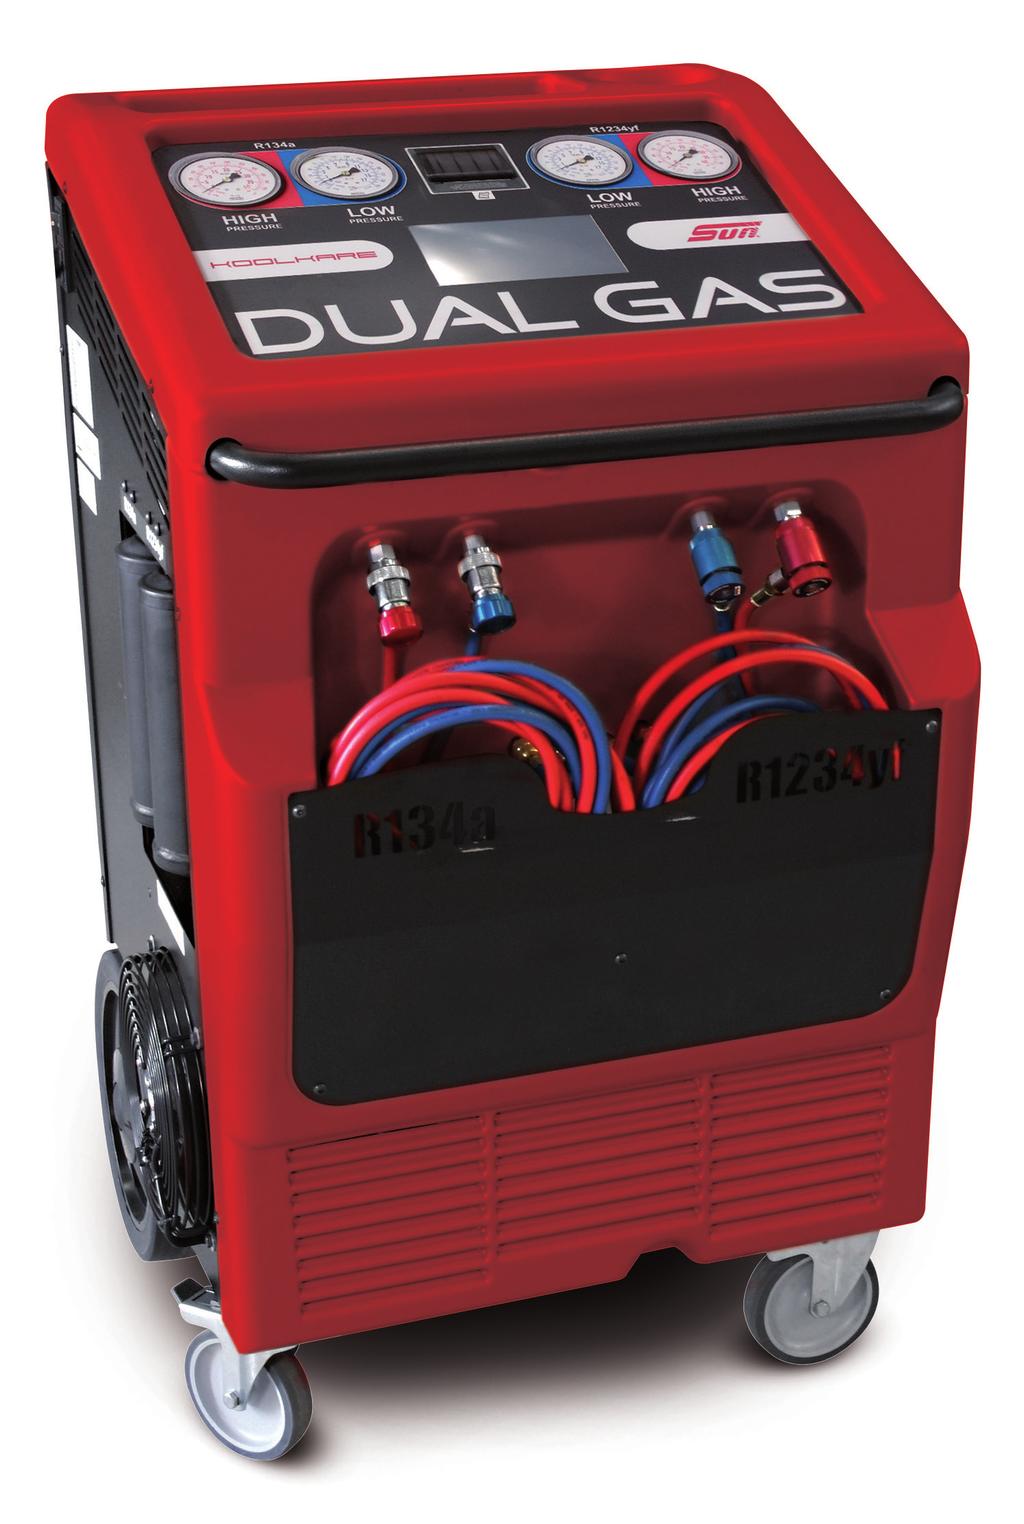 KOOLKARE DUAL GAS UNIT We are pleased to announce the introduction of the fully automatic KoolKare Dual gas-station for recovering, recycling and recharging R134a and R1234YF refrigerants.